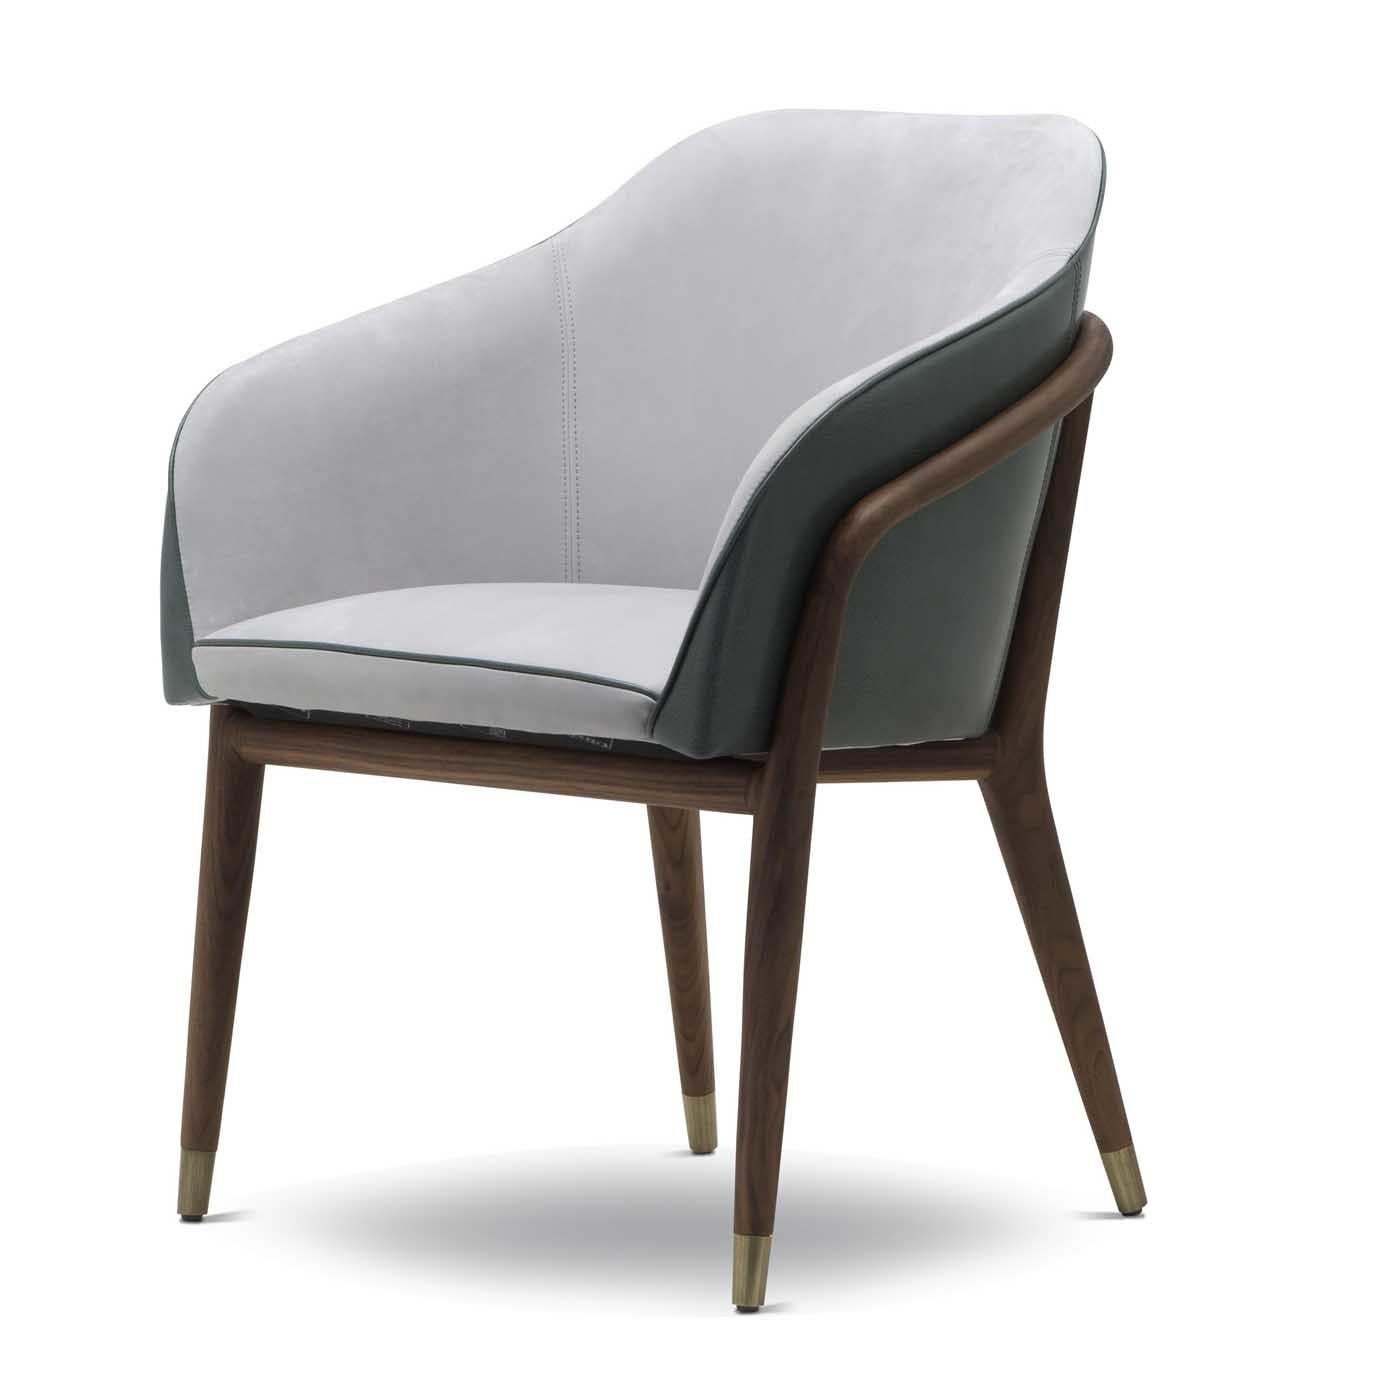 This superb chair is a splendid addition to a modern home, thanks to its exquisite craftsmanship, unique use of colors, and fine materials. The midcentury-inspired design comprises a solid American walnut structure with tapered legs adorned with